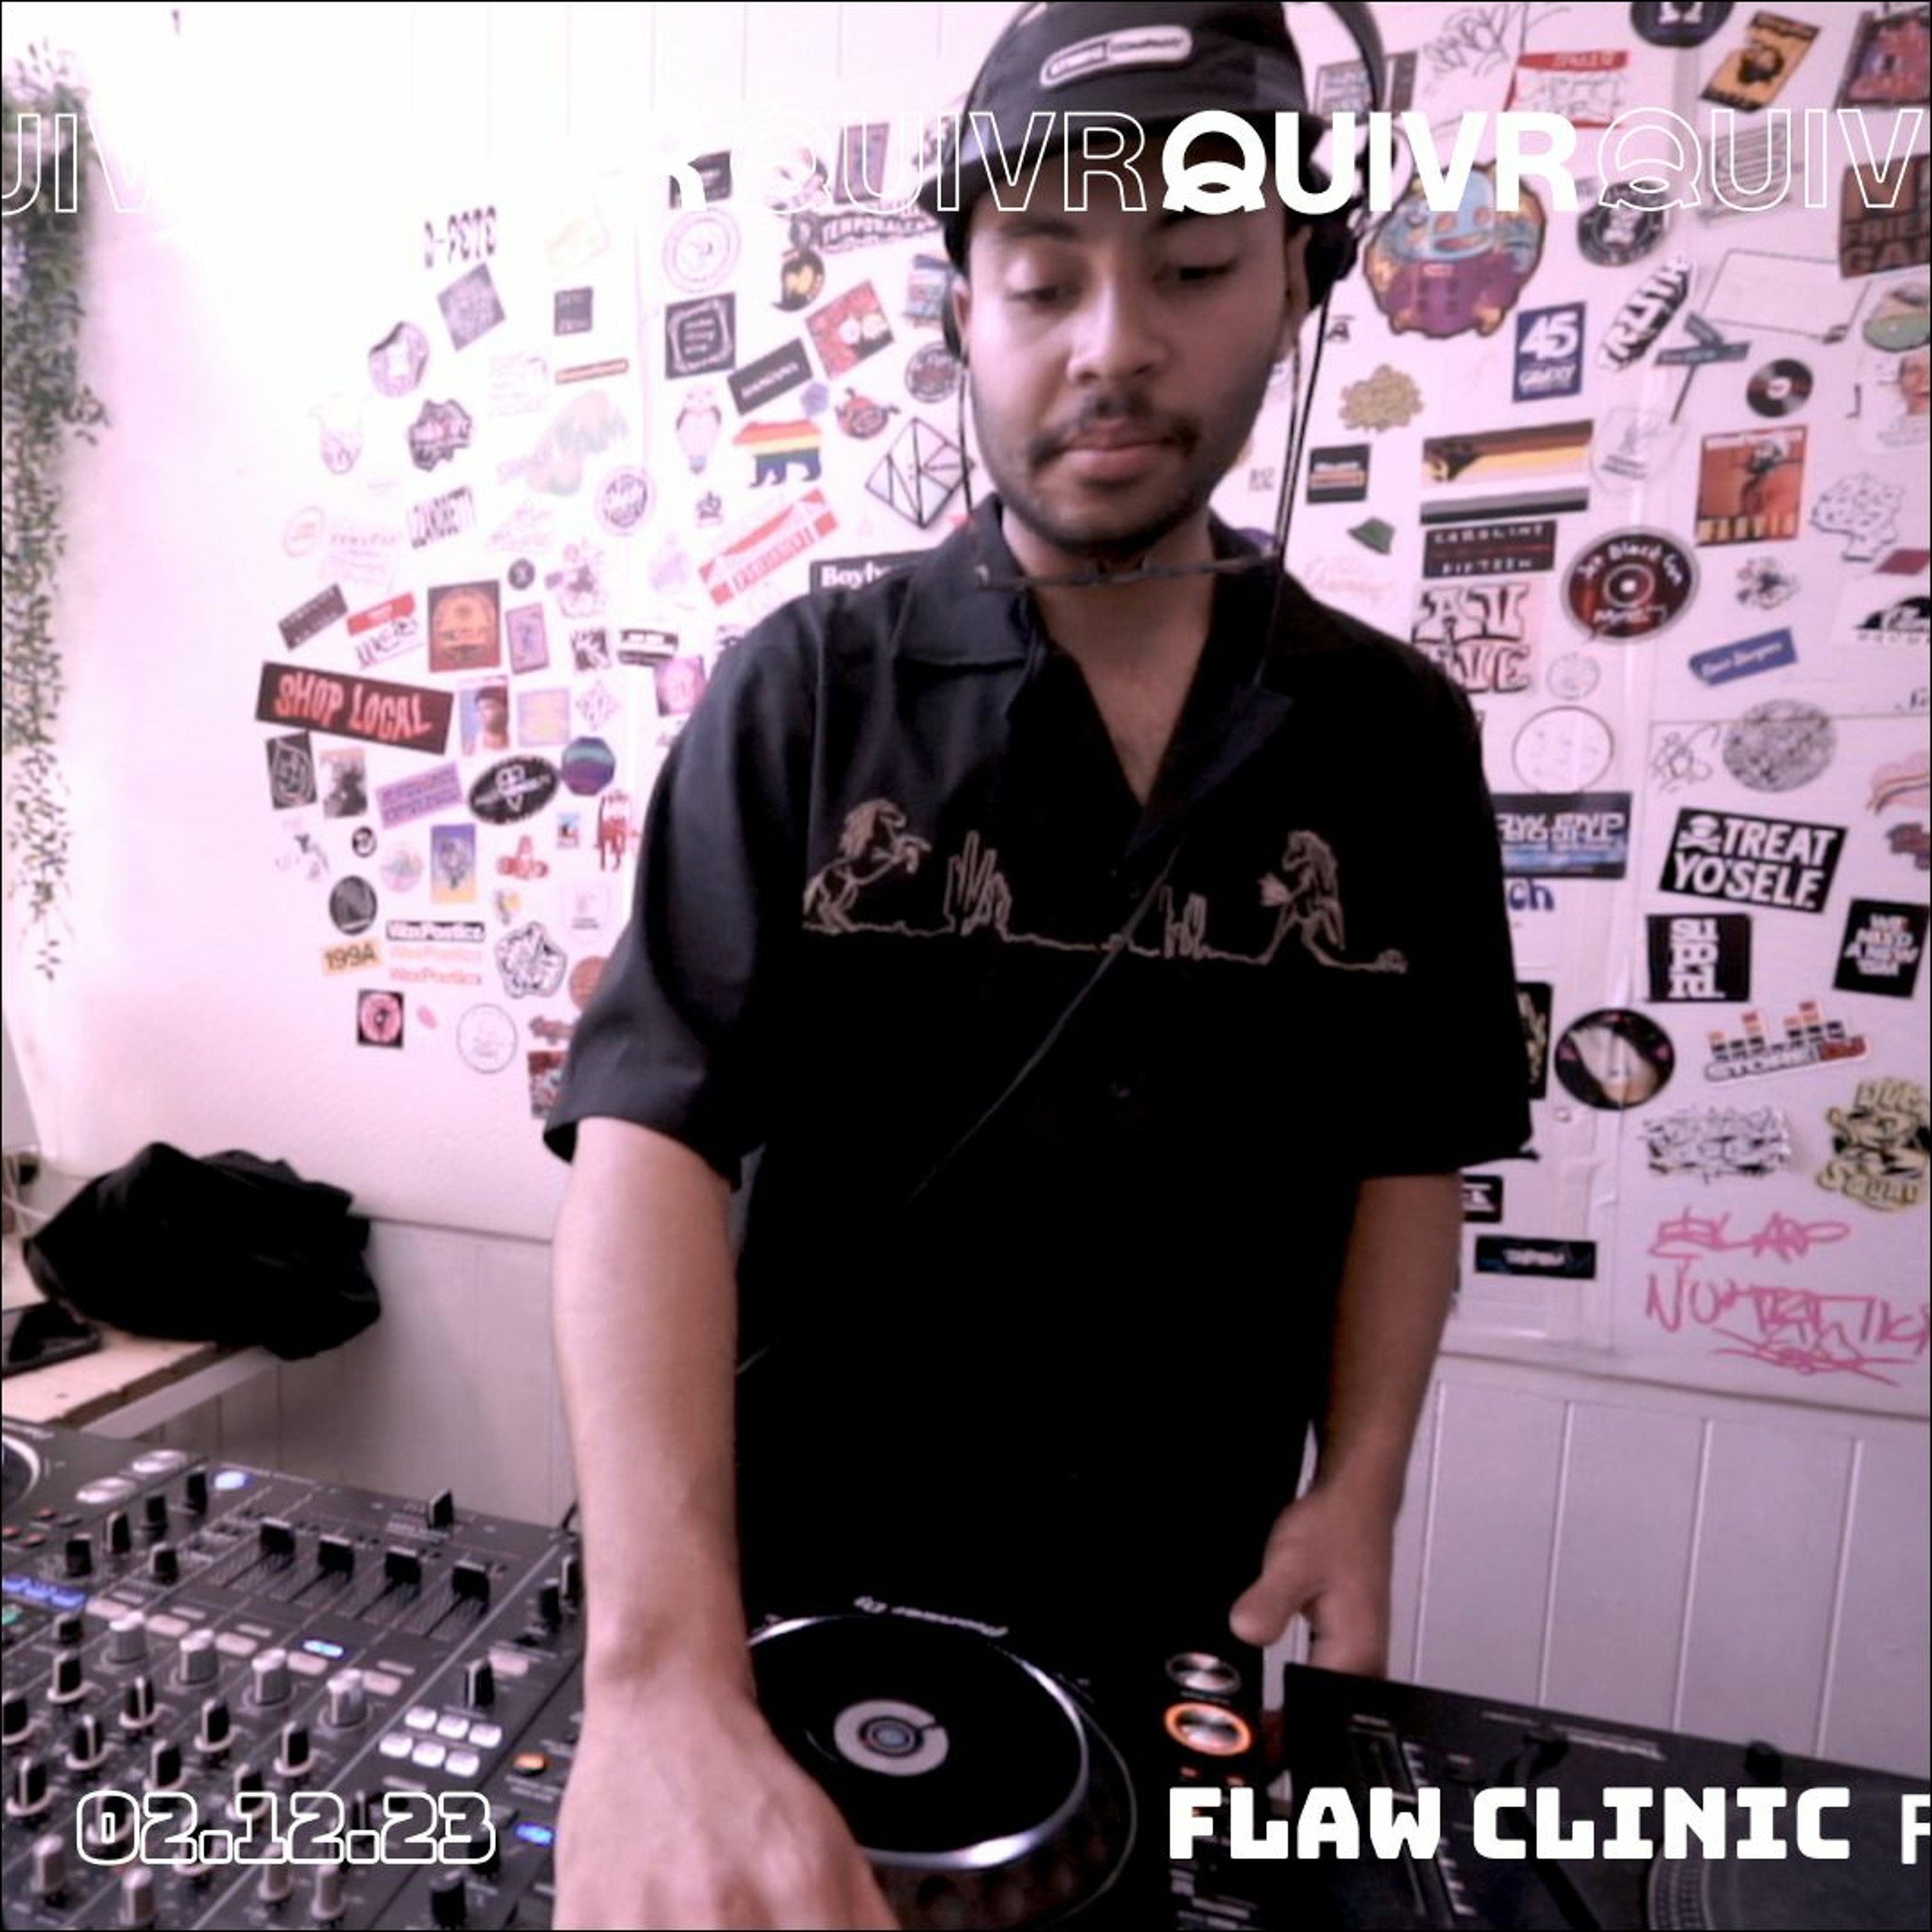 Flaw Clinic | QUIVR | 02-12-23